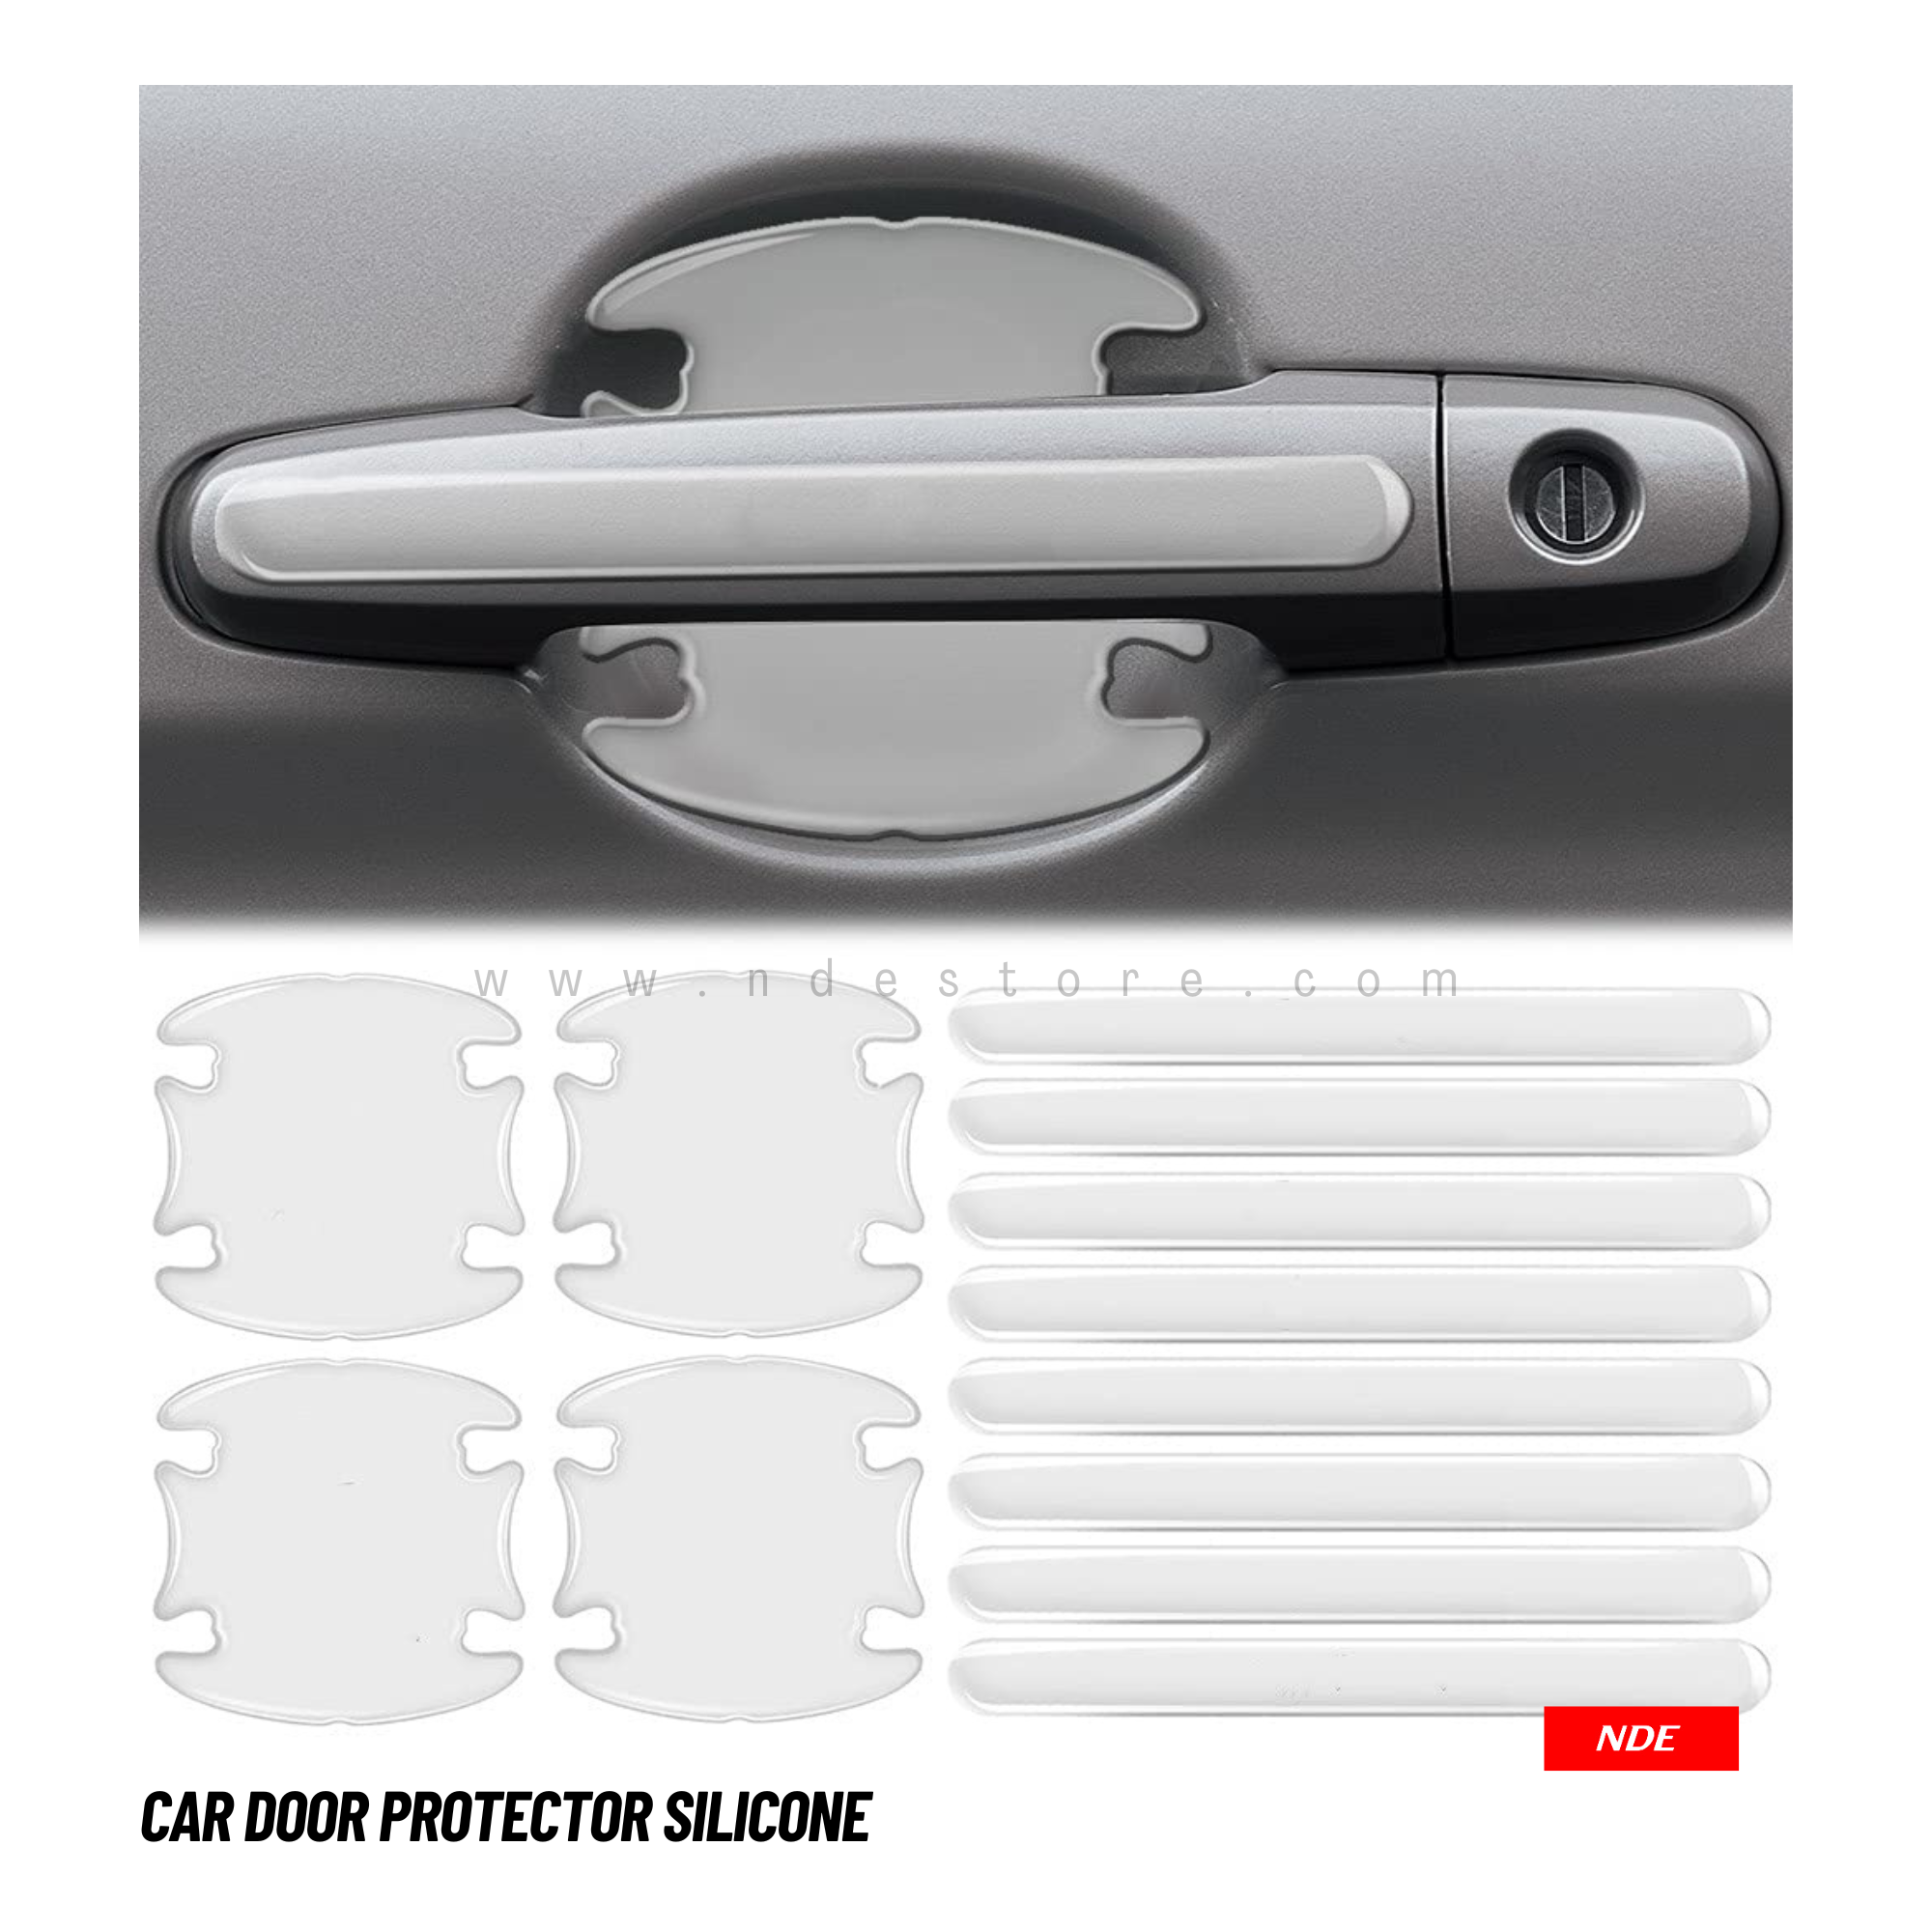 DOOR SILL AREA PROTECTION CARBON FIBER STICKER FOR HONDA - NDE STORE